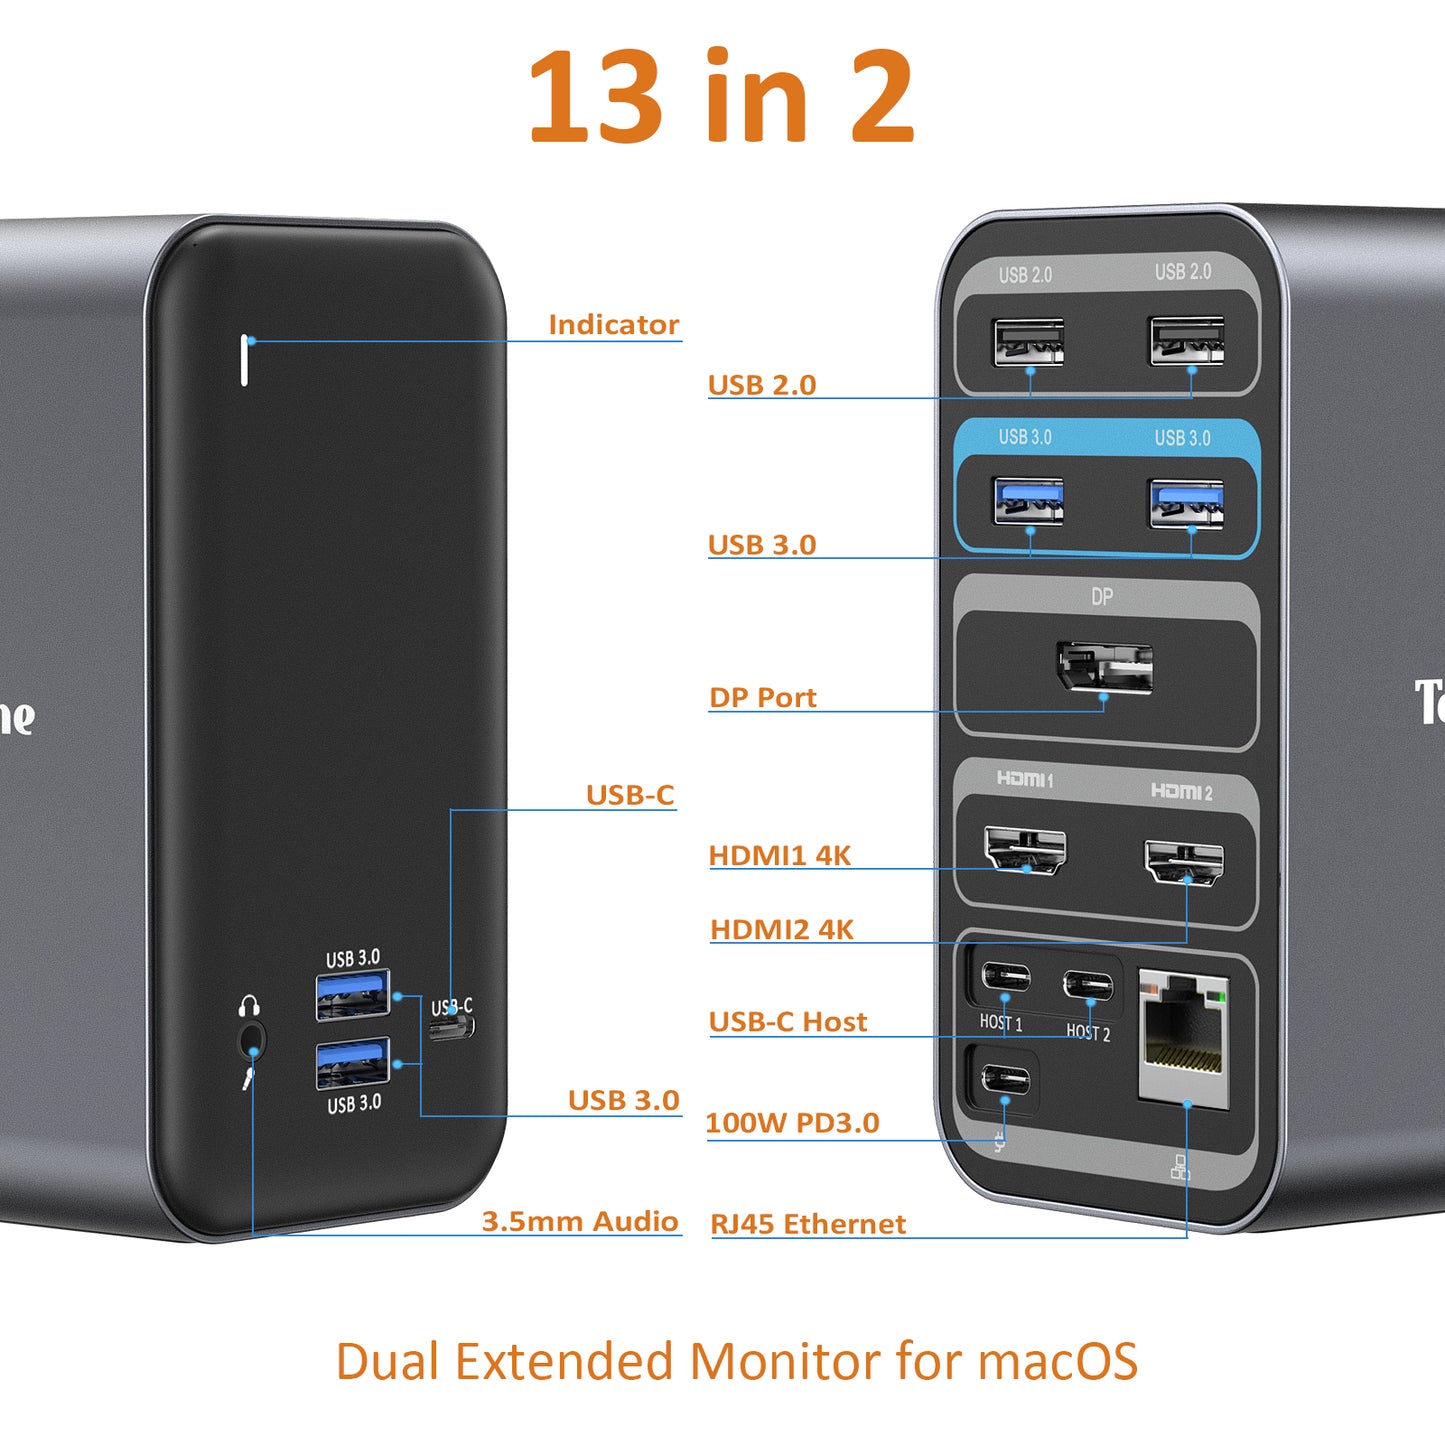 13-in-2 USB C Docking Station Dual Extened Monitor for macOS